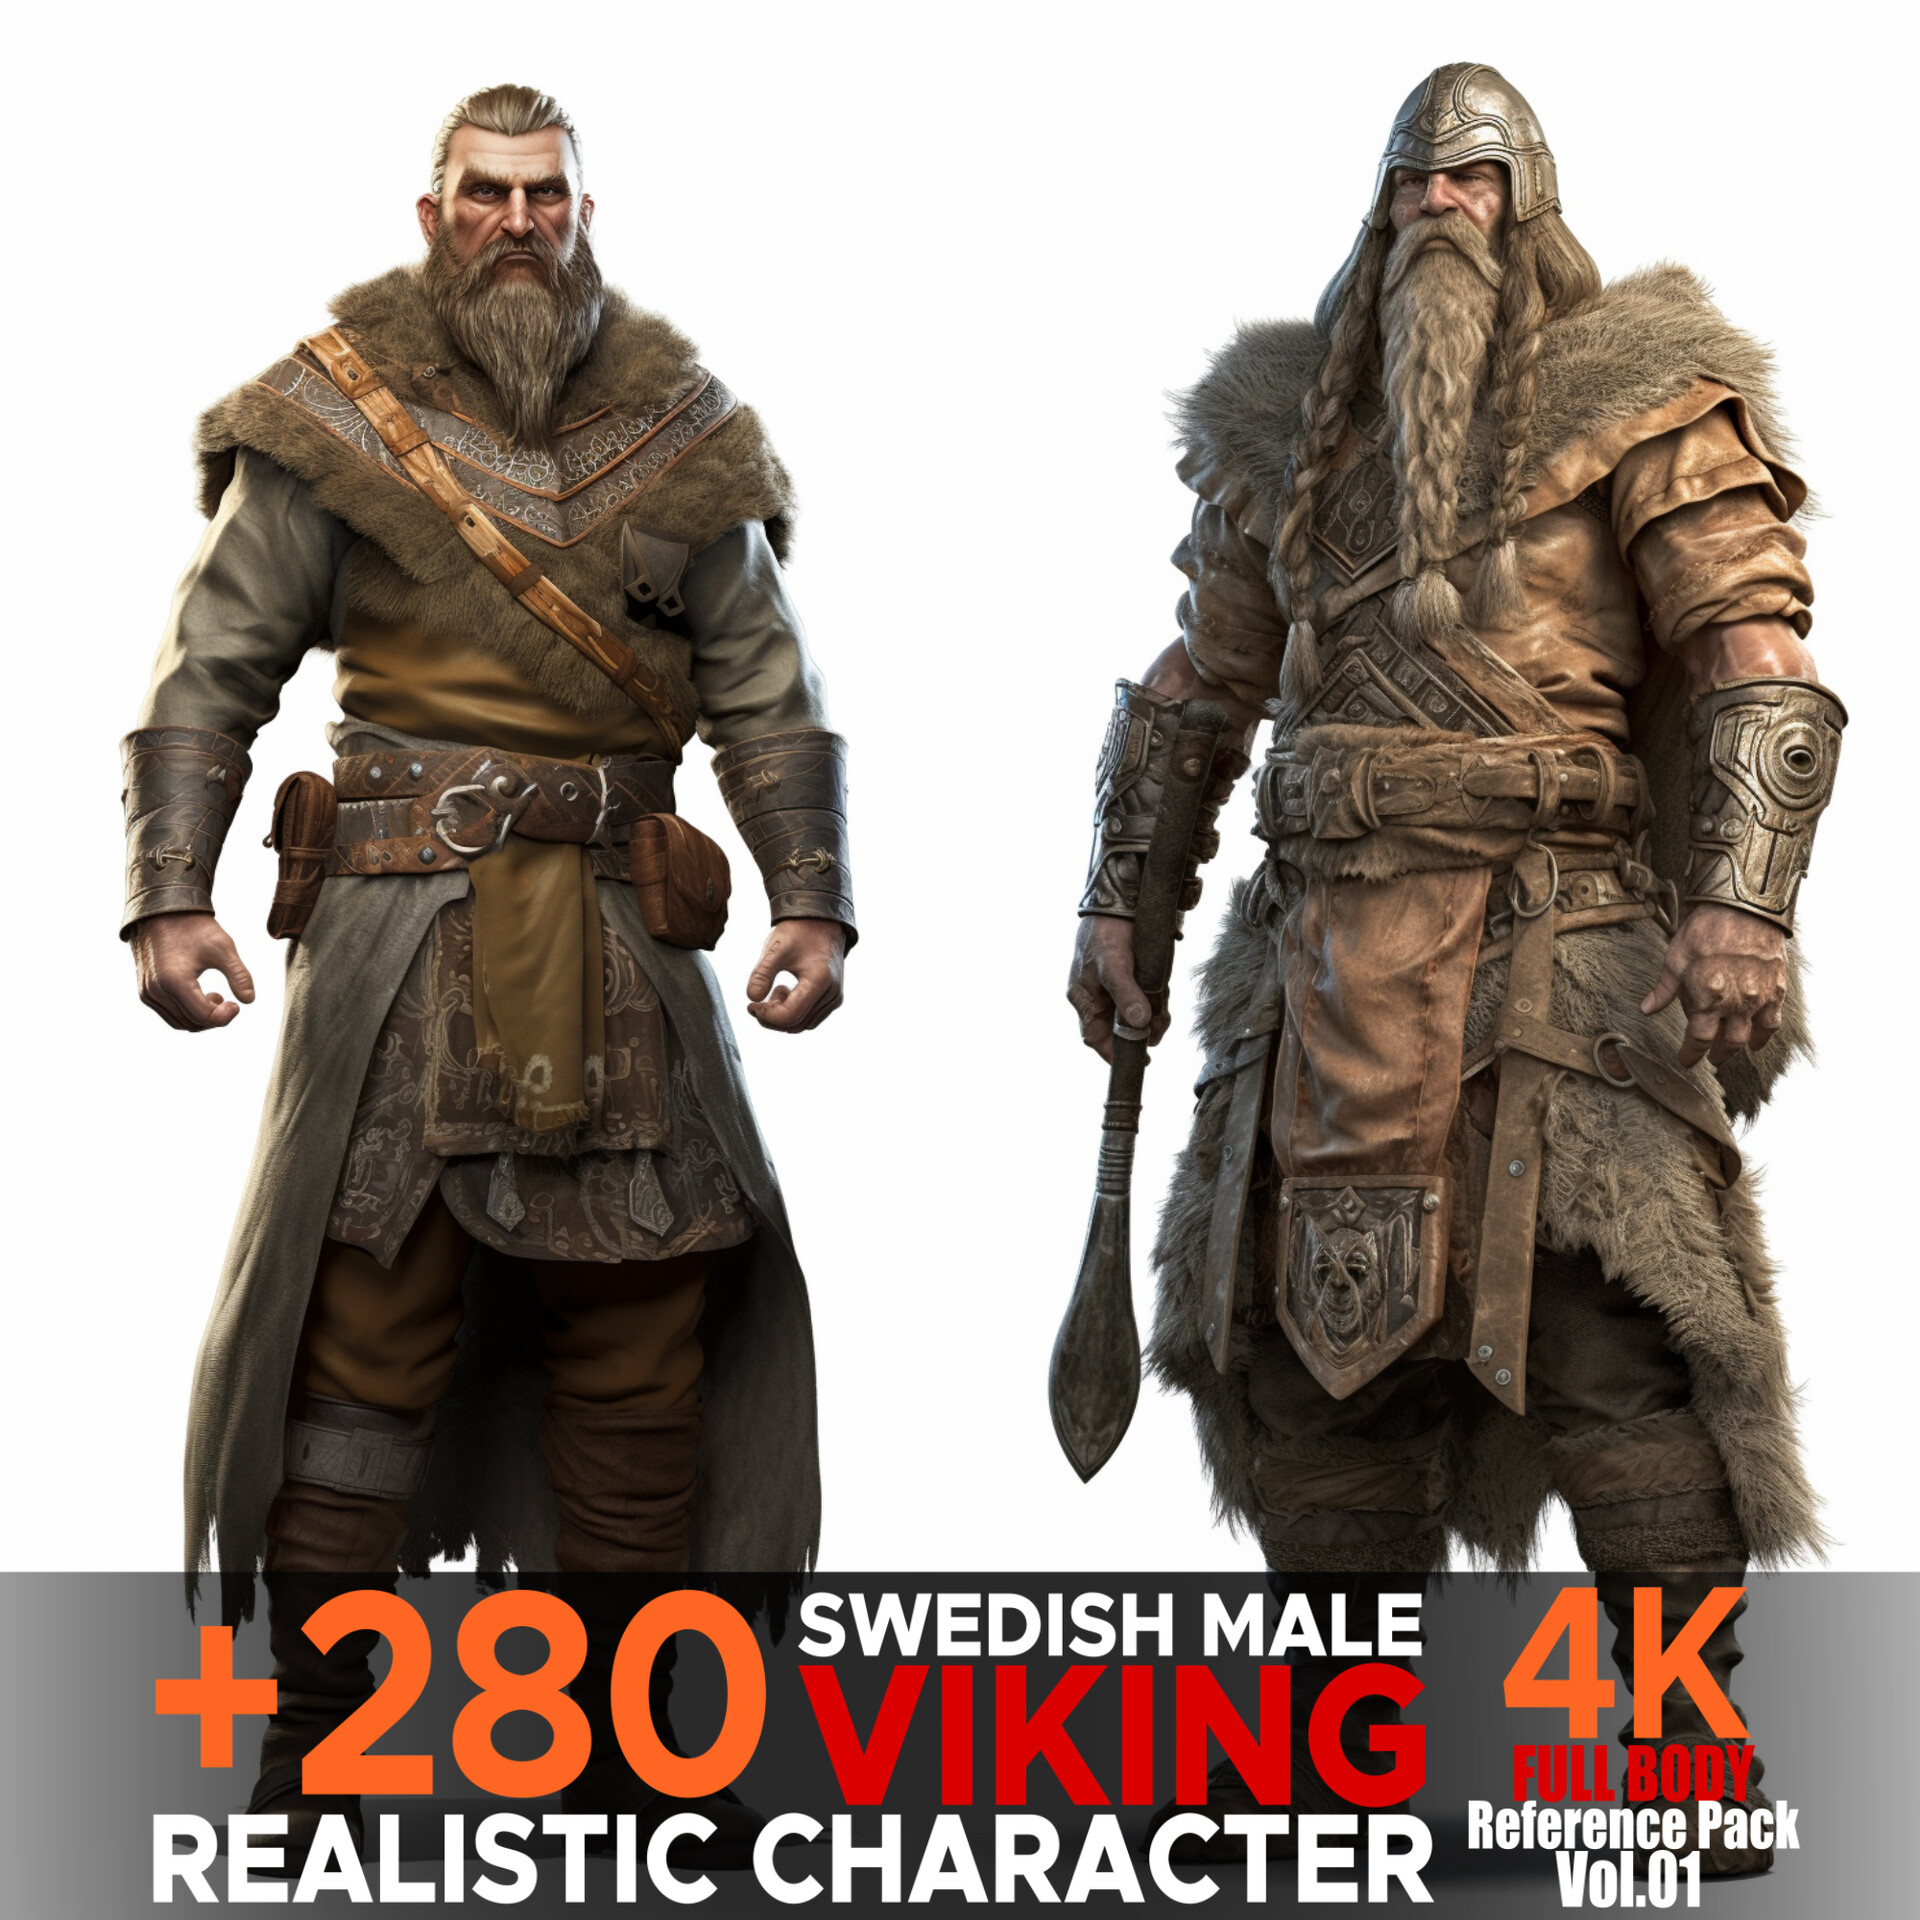 Category:Male Characters, Vikings Wiki